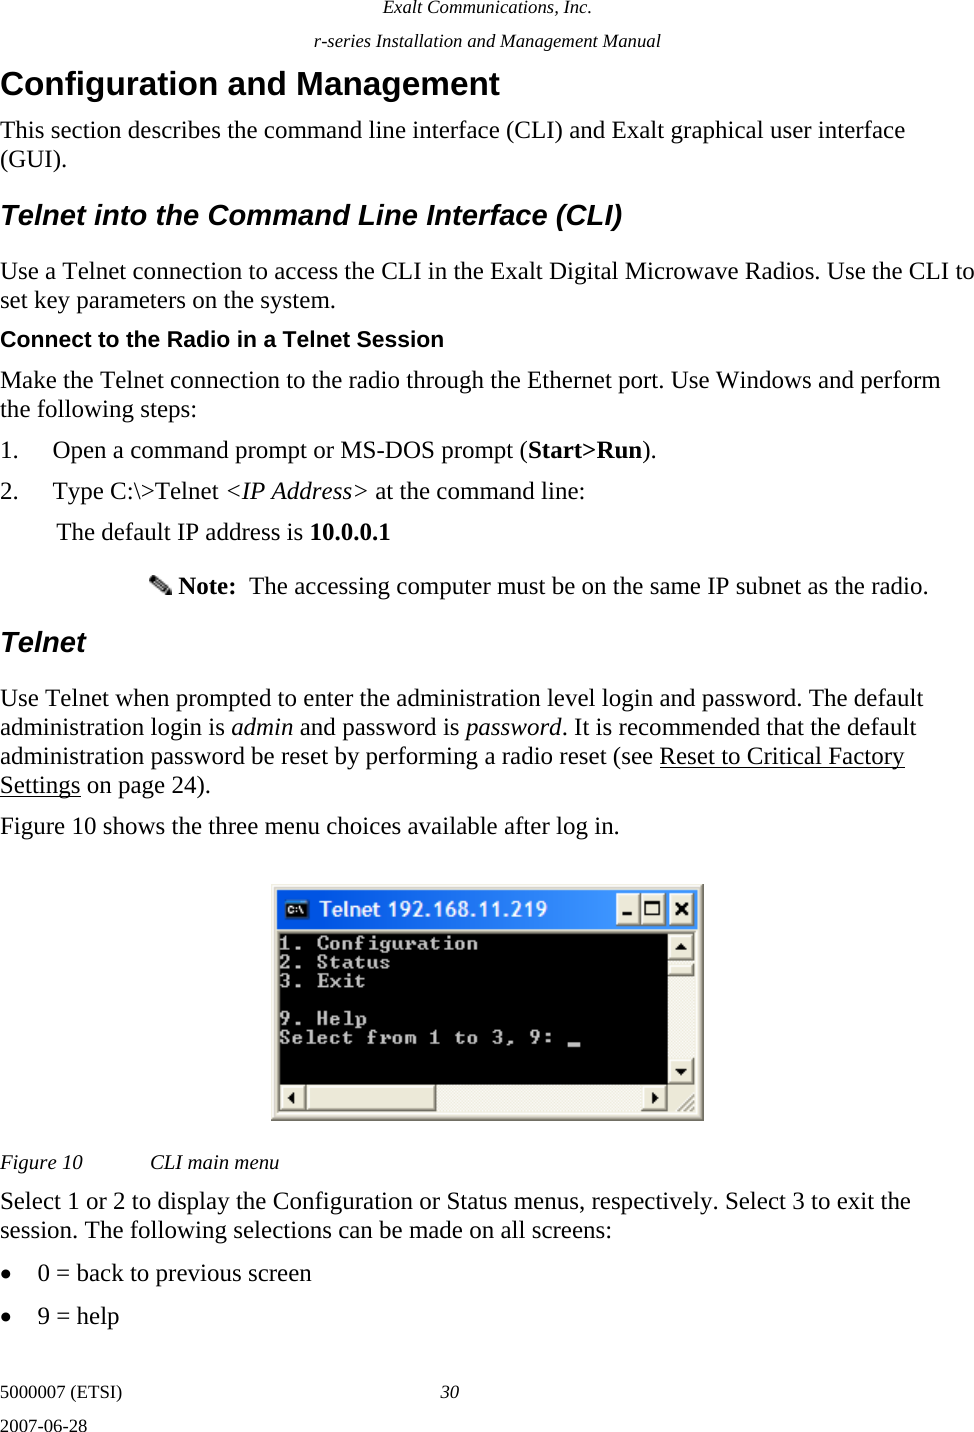 Exalt Communications, Inc. r-series Installation and Management Manual 5000007 (ETSI)  30 2007-06-28  Configuration and Management This section describes the command line interface (CLI) and Exalt graphical user interface (GUI). Telnet into the Command Line Interface (CLI) Use a Telnet connection to access the CLI in the Exalt Digital Microwave Radios. Use the CLI to set key parameters on the system. Connect to the Radio in a Telnet Session Make the Telnet connection to the radio through the Ethernet port. Use Windows and perform the following steps: 1. Open a command prompt or MS-DOS prompt (Start&gt;Run). 2. Type C:\&gt;Telnet &lt;IP Address&gt; at the command line: The default IP address is 10.0.0.1  Note:  The accessing computer must be on the same IP subnet as the radio. Telnet Use Telnet when prompted to enter the administration level login and password. The default administration login is admin and password is password. It is recommended that the default administration password be reset by performing a radio reset (see Reset to Critical Factory Settings on page 24). Figure 10 shows the three menu choices available after log in. Figure 10  CLI main menu Select 1 or 2 to display the Configuration or Status menus, respectively. Select 3 to exit the session. The following selections can be made on all screens: • 0 = back to previous screen • 9 = help 